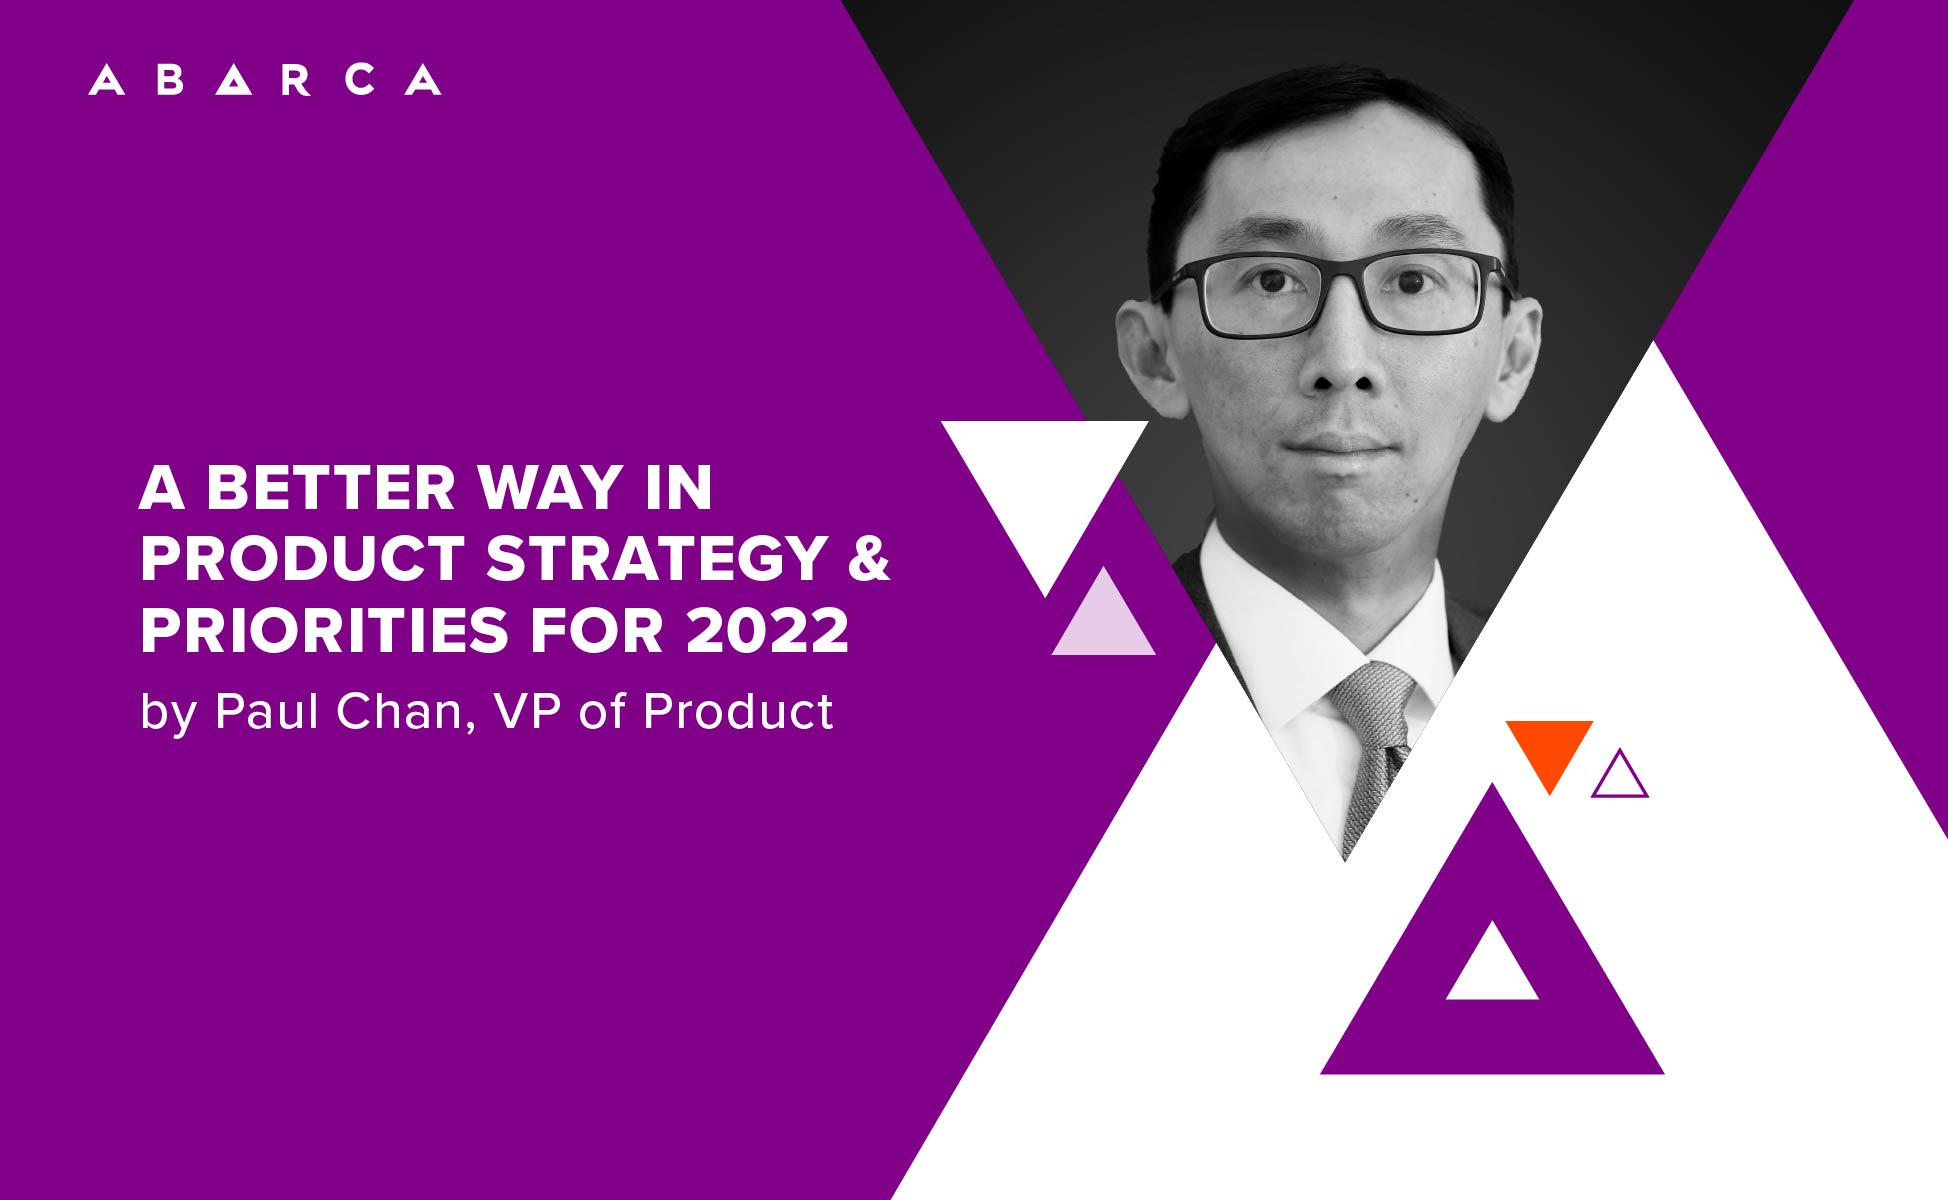 A Better Way in Product Strategy & Priorities for 2022 by Paul Chan, VP of Product at Abarca Health